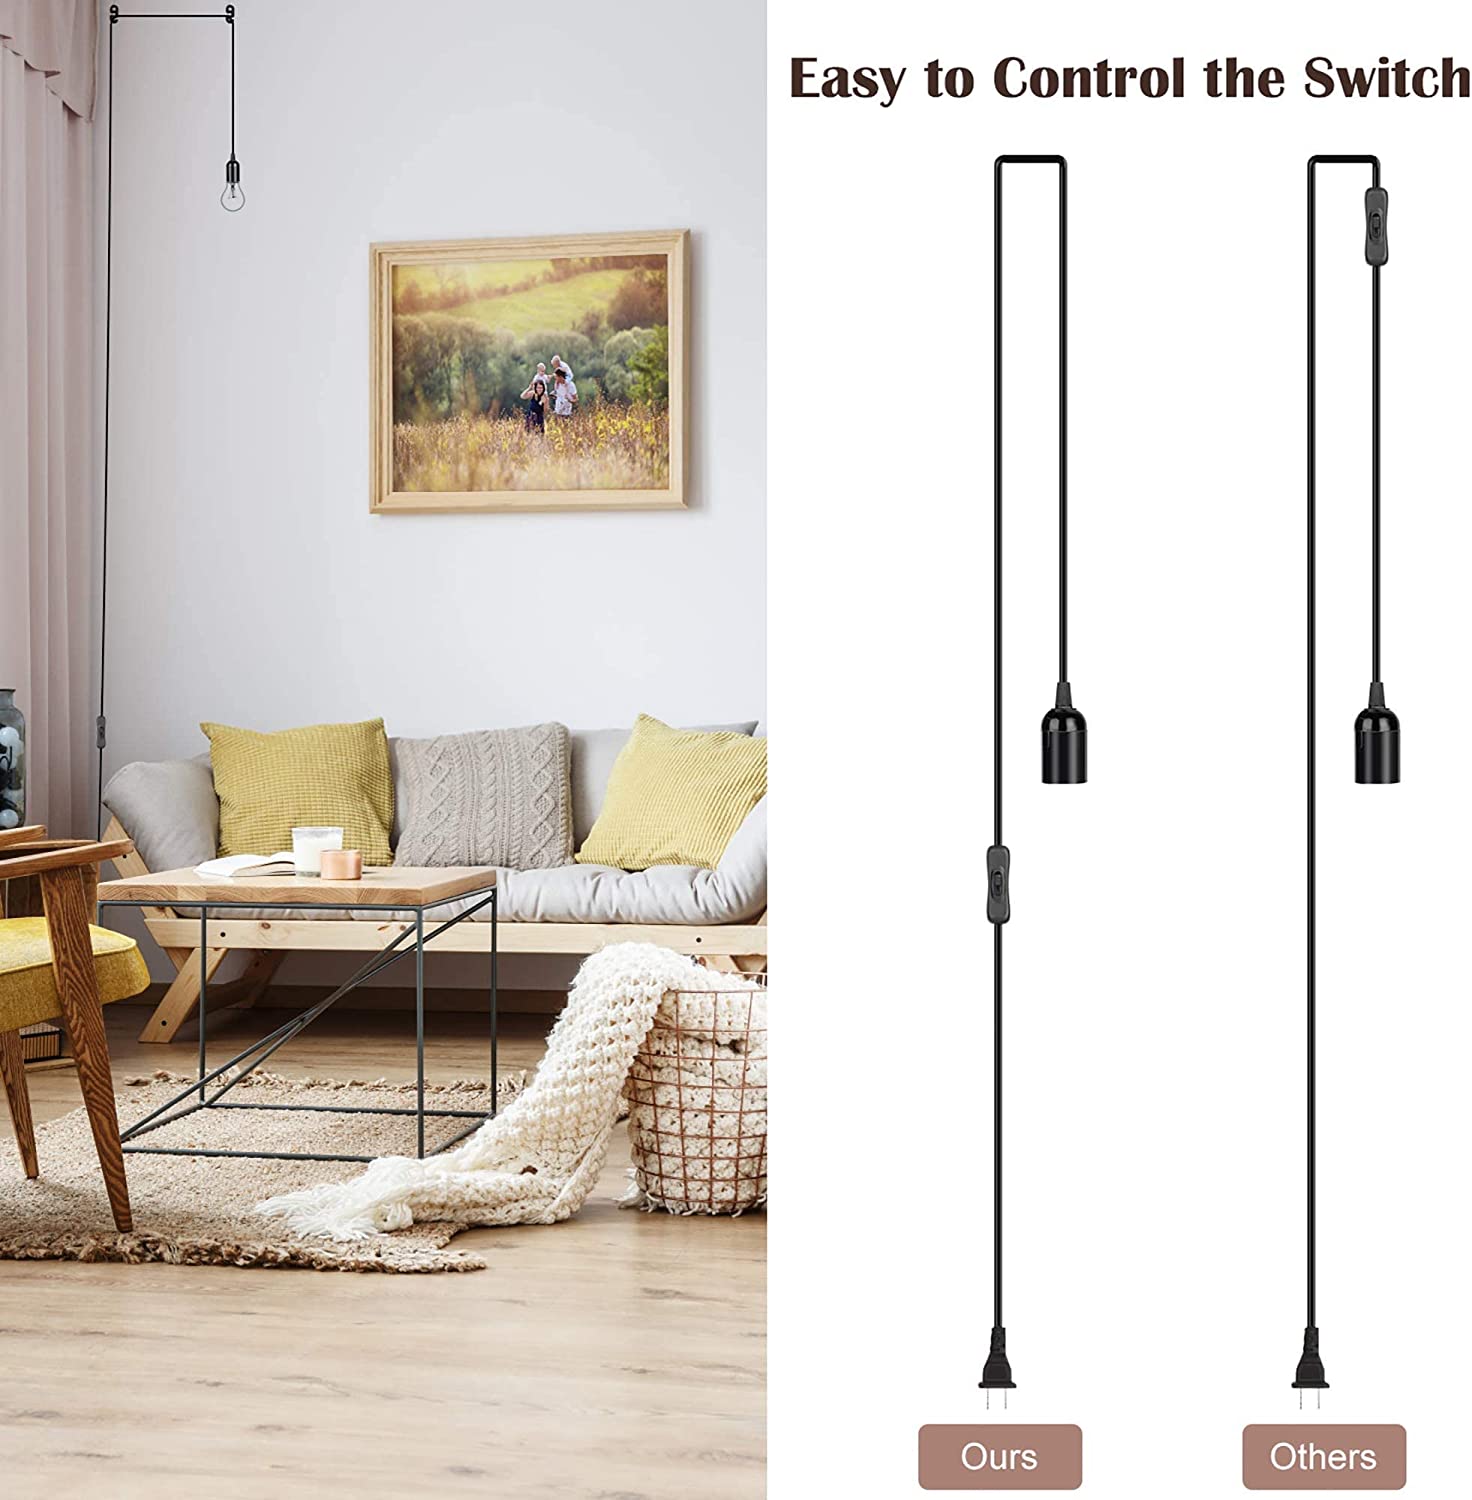 UL 360W Extension Hanging Lantern Cord Cable